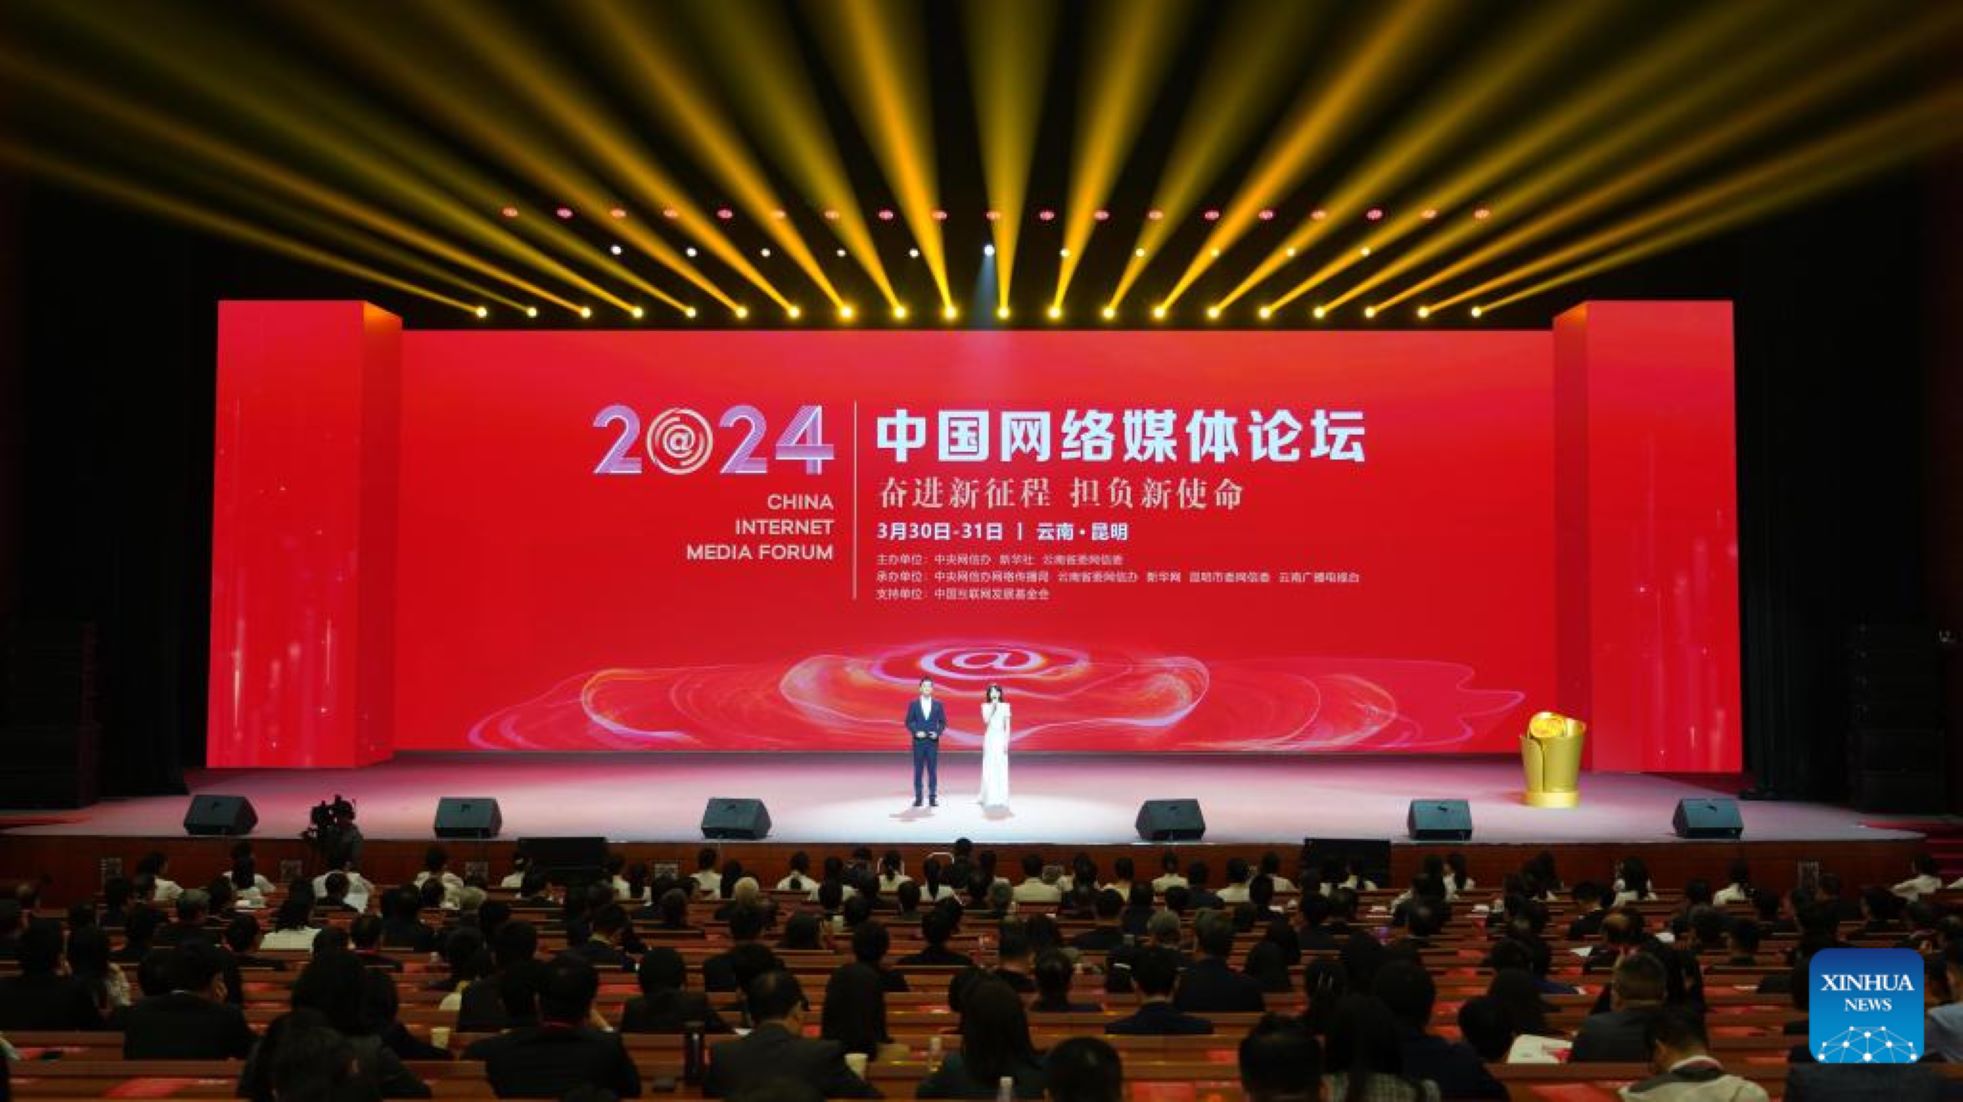 2024 China Internet Media Forum Opened In Yunnan Province